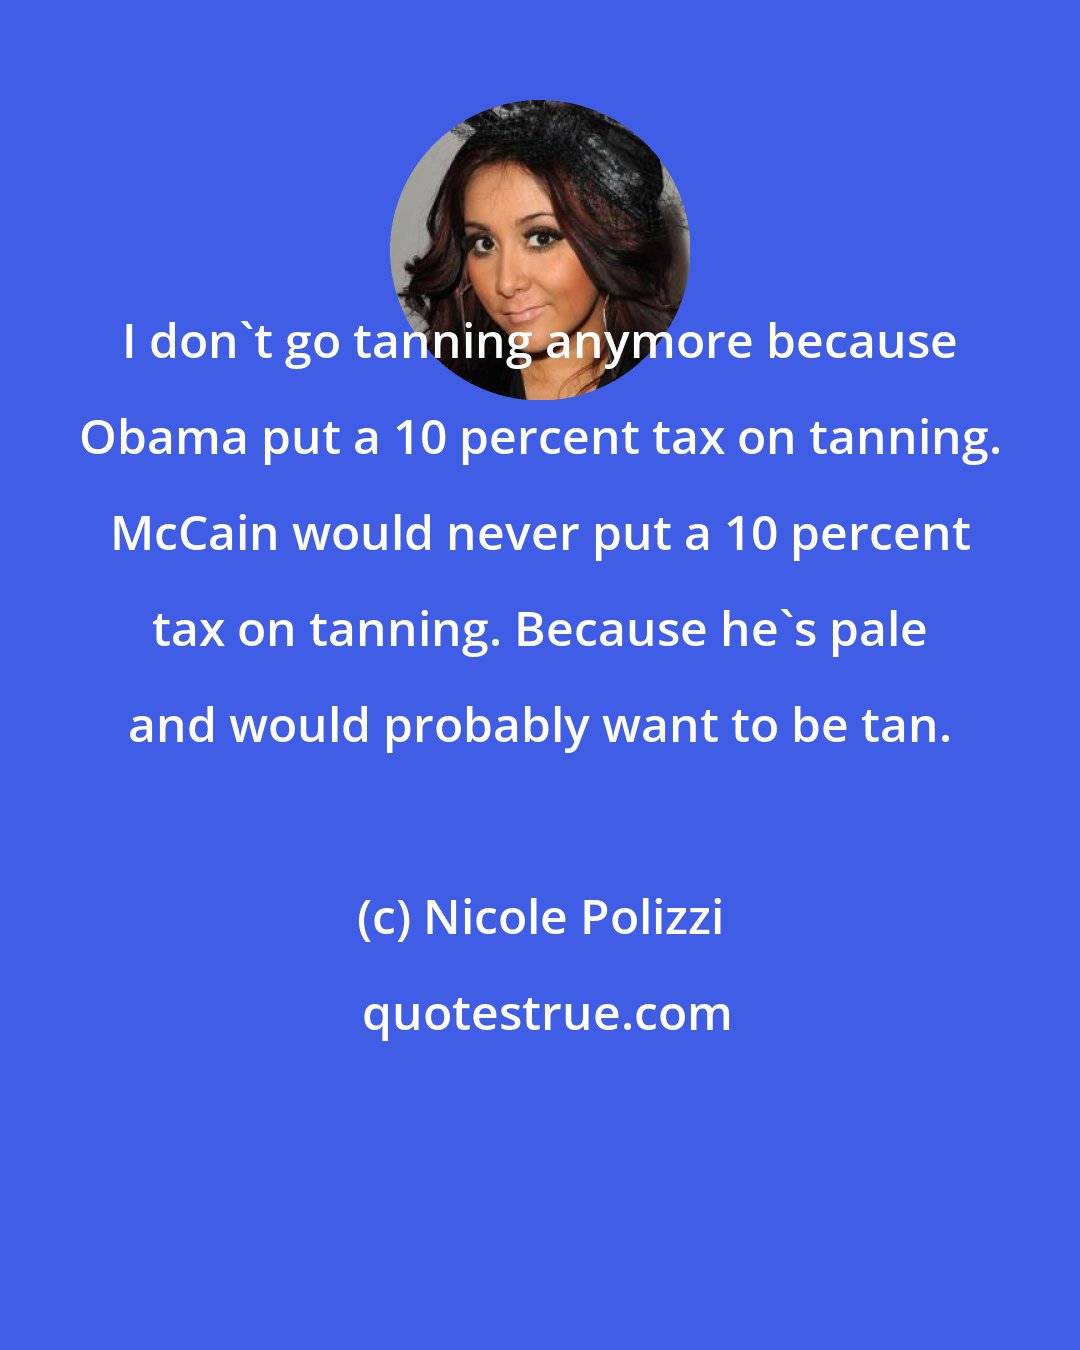 Nicole Polizzi: I don't go tanning anymore because Obama put a 10 percent tax on tanning. McCain would never put a 10 percent tax on tanning. Because he's pale and would probably want to be tan.